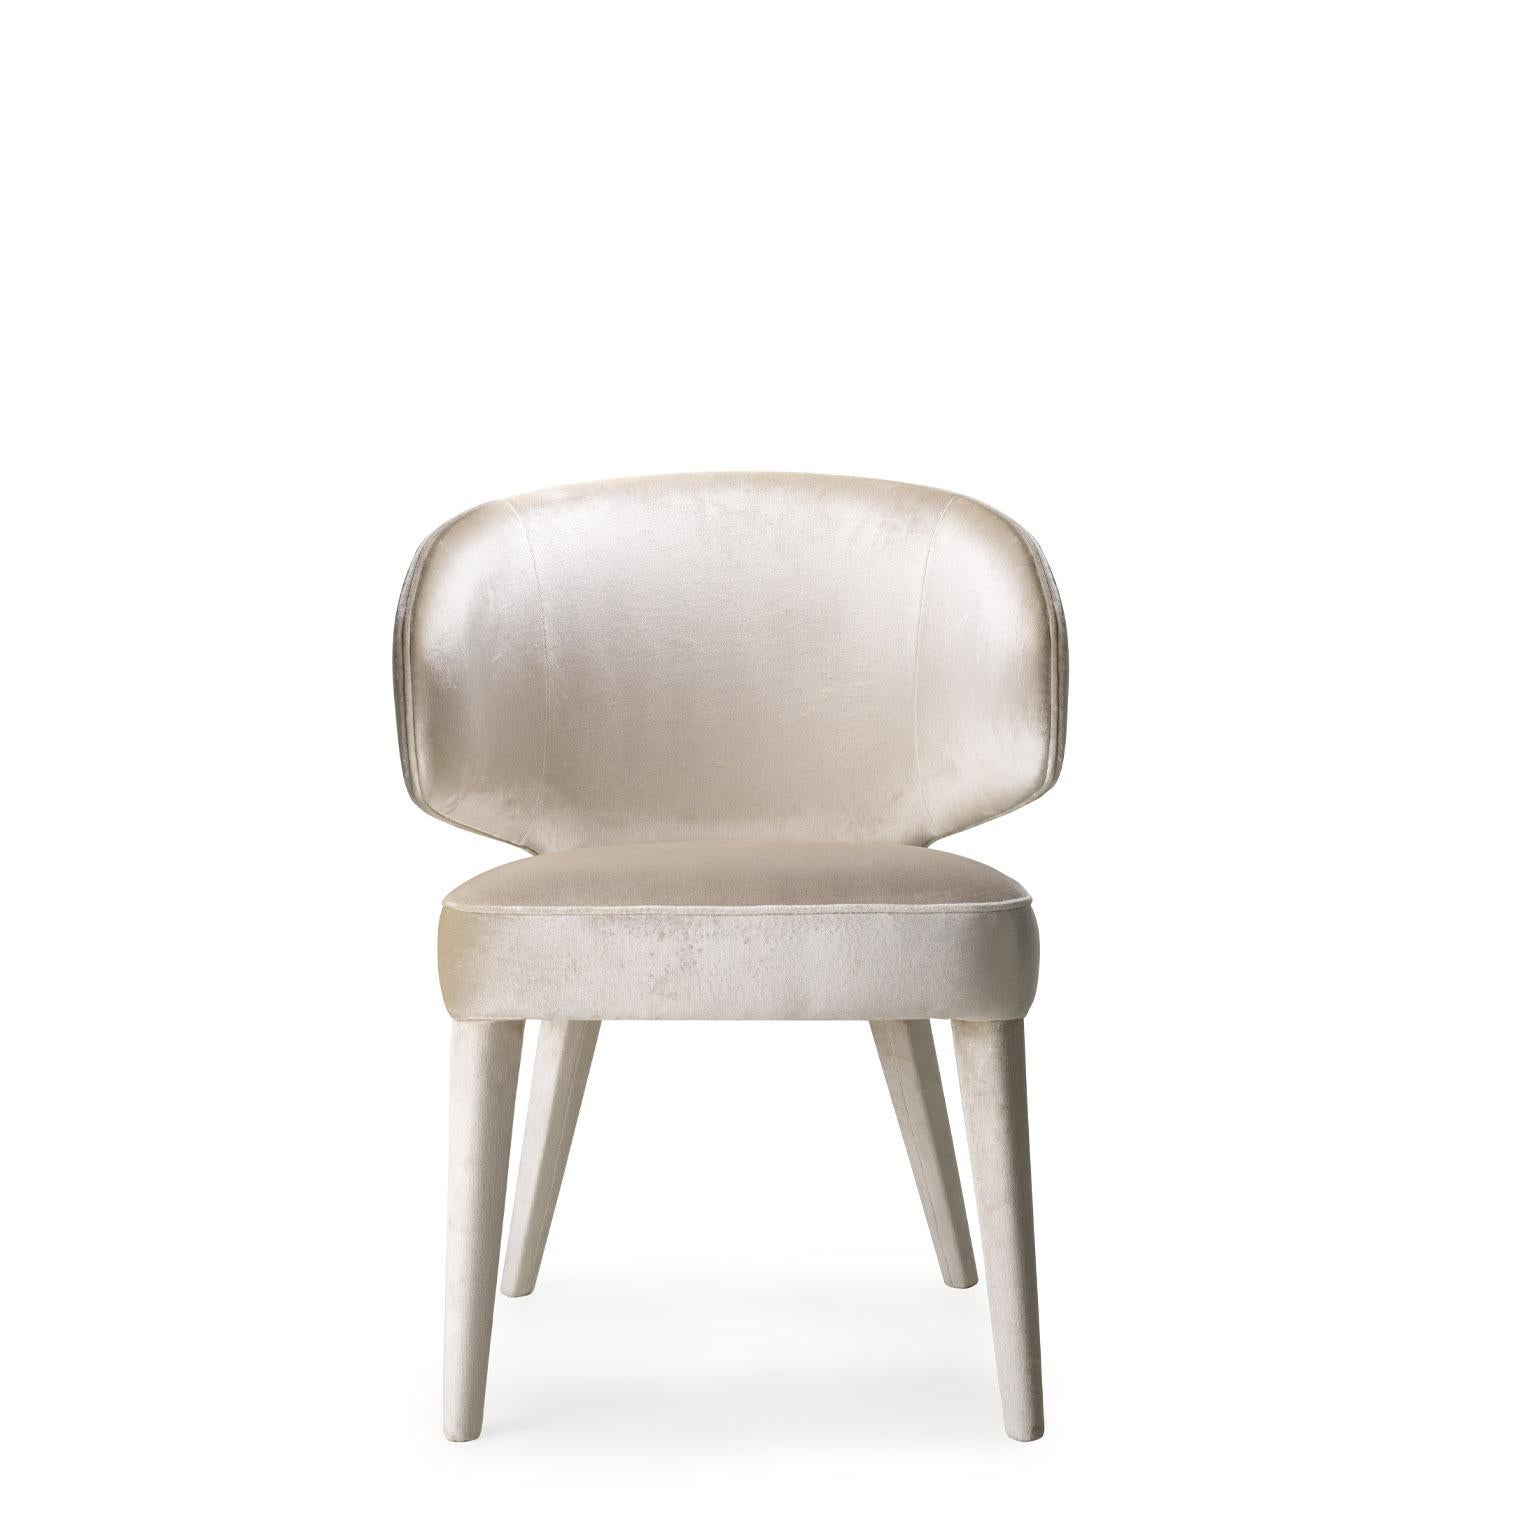 Hand-Crafted Circe Chair in Splendido Perla Velvet with Detail in Corno Italiano, Mod. 4433AC For Sale